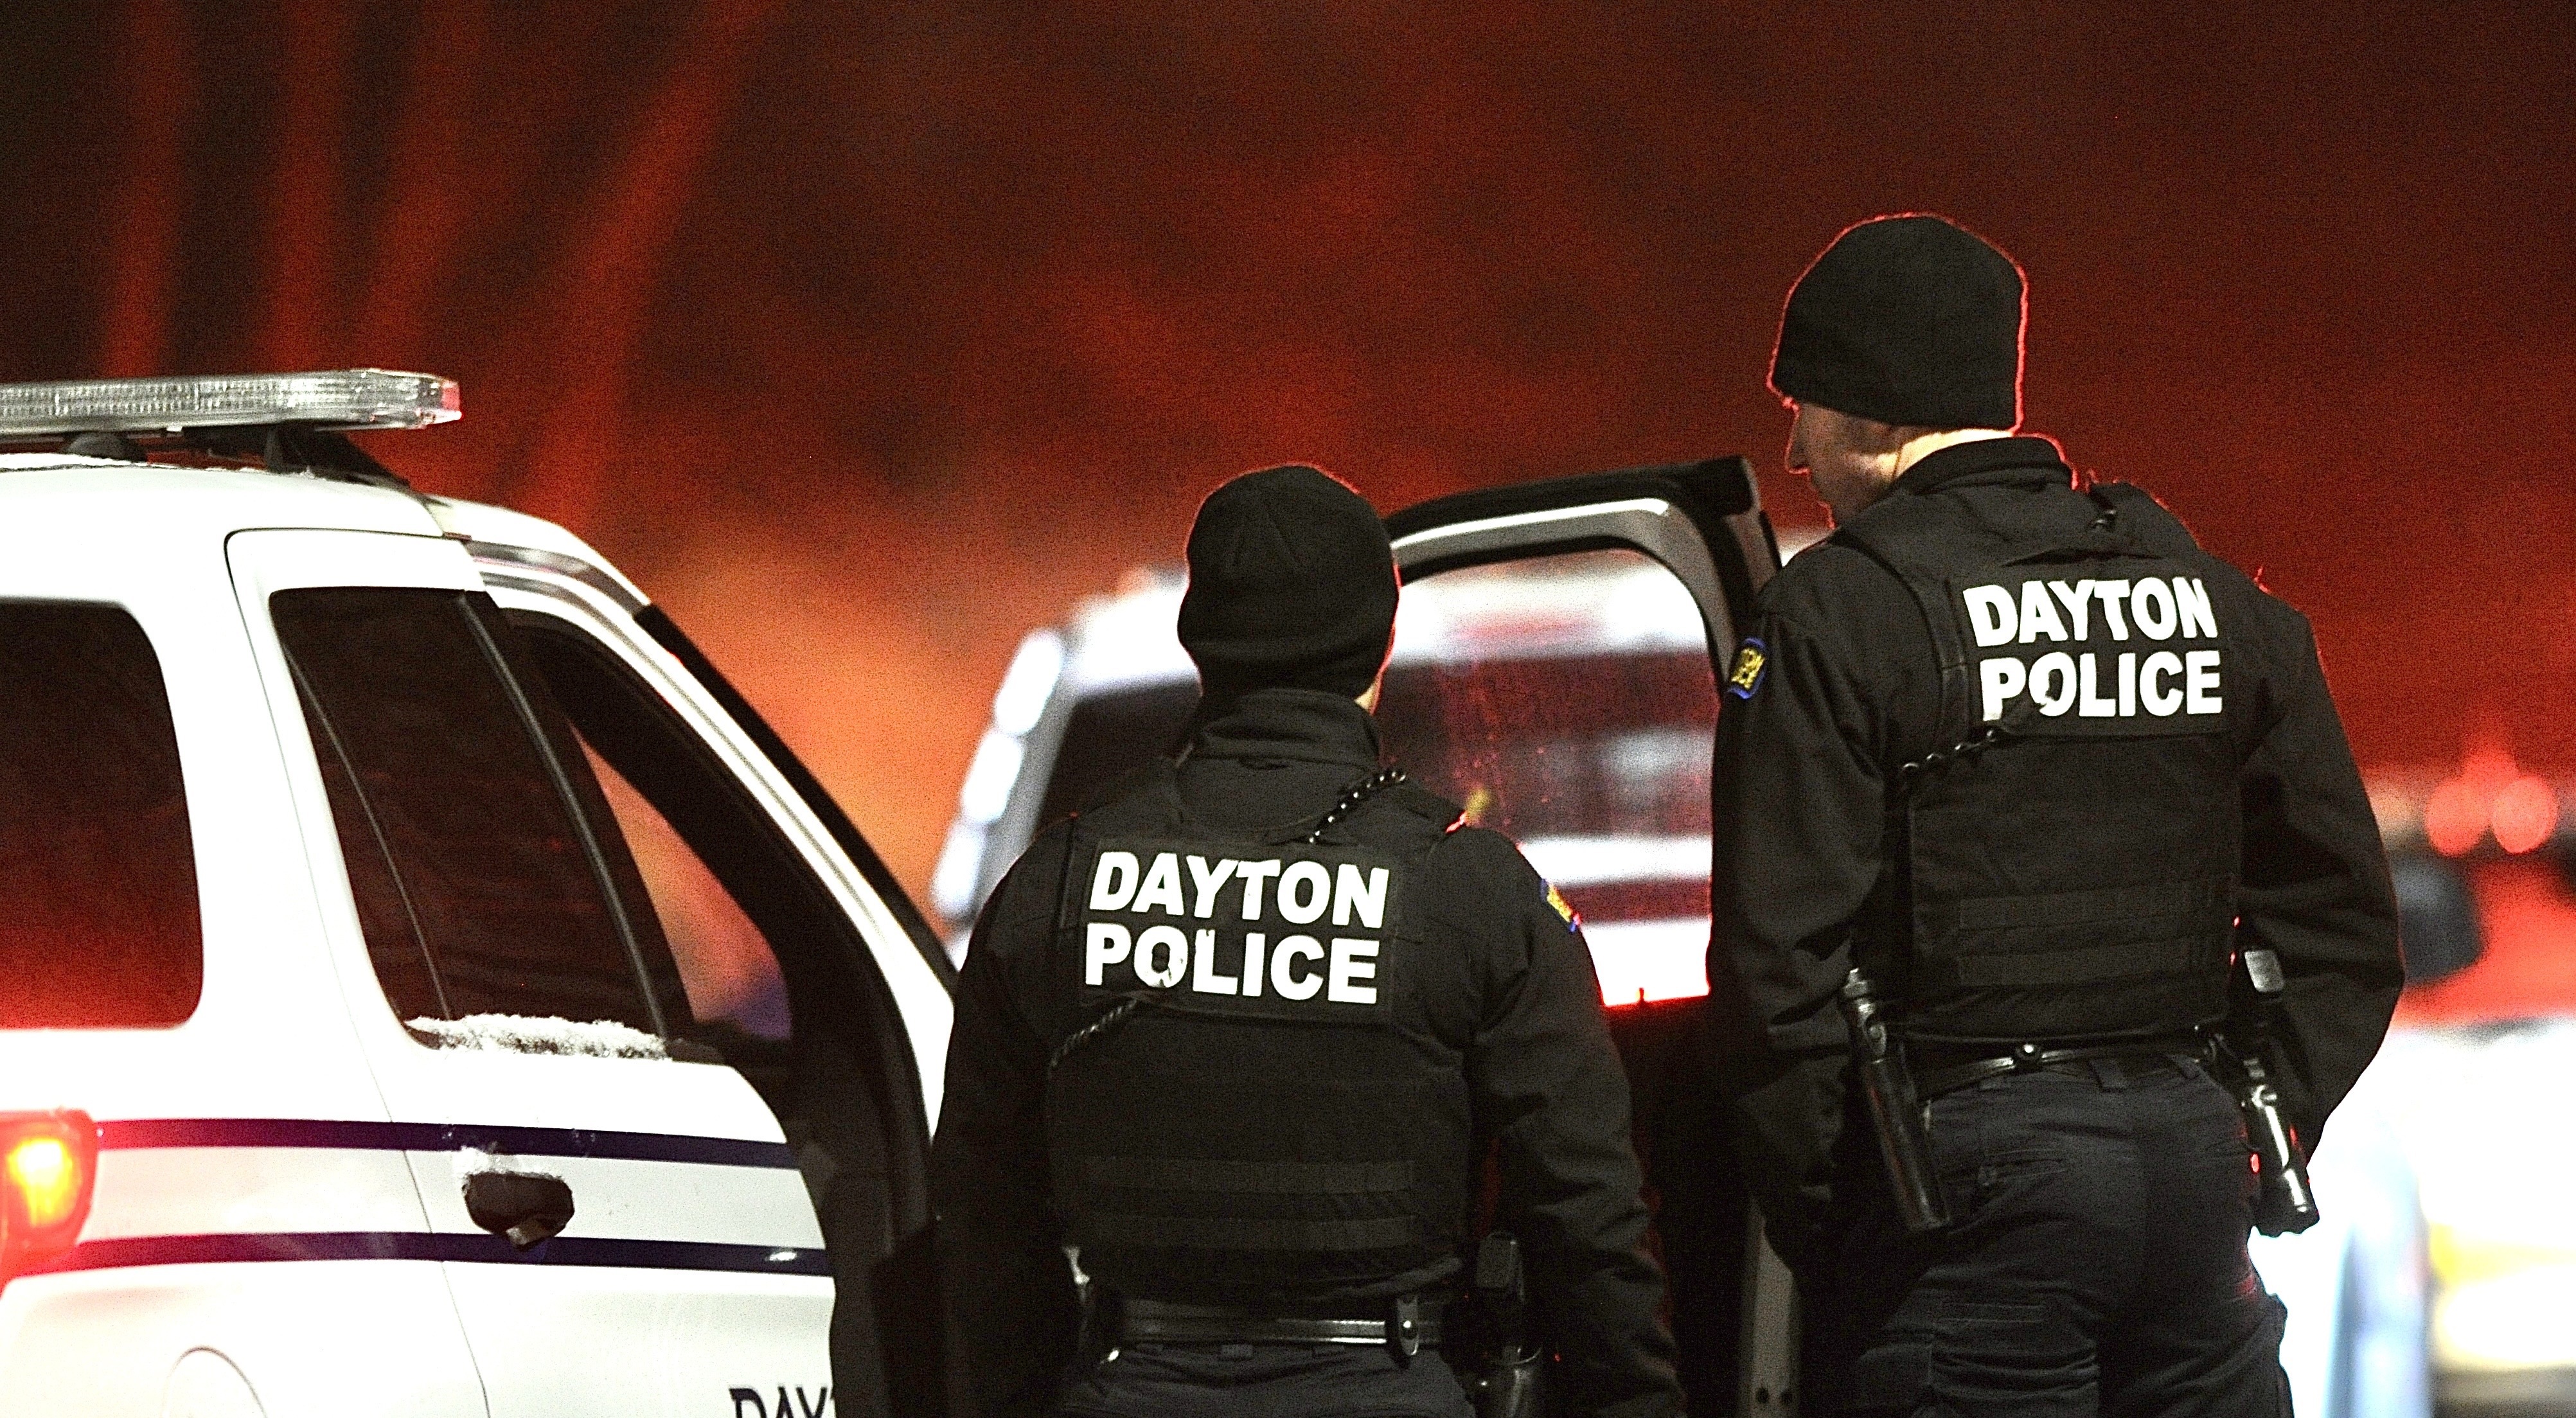 SWAT officers from the Dayton Police Department assisted the Riverside Police Department at the scene of a triple shooting Monday night, Jan. 17, 2022, at 4525 Richland Drive In Riverside. Two people were killed and a third person is expected to recover. MARSHALL GORBY STAFF